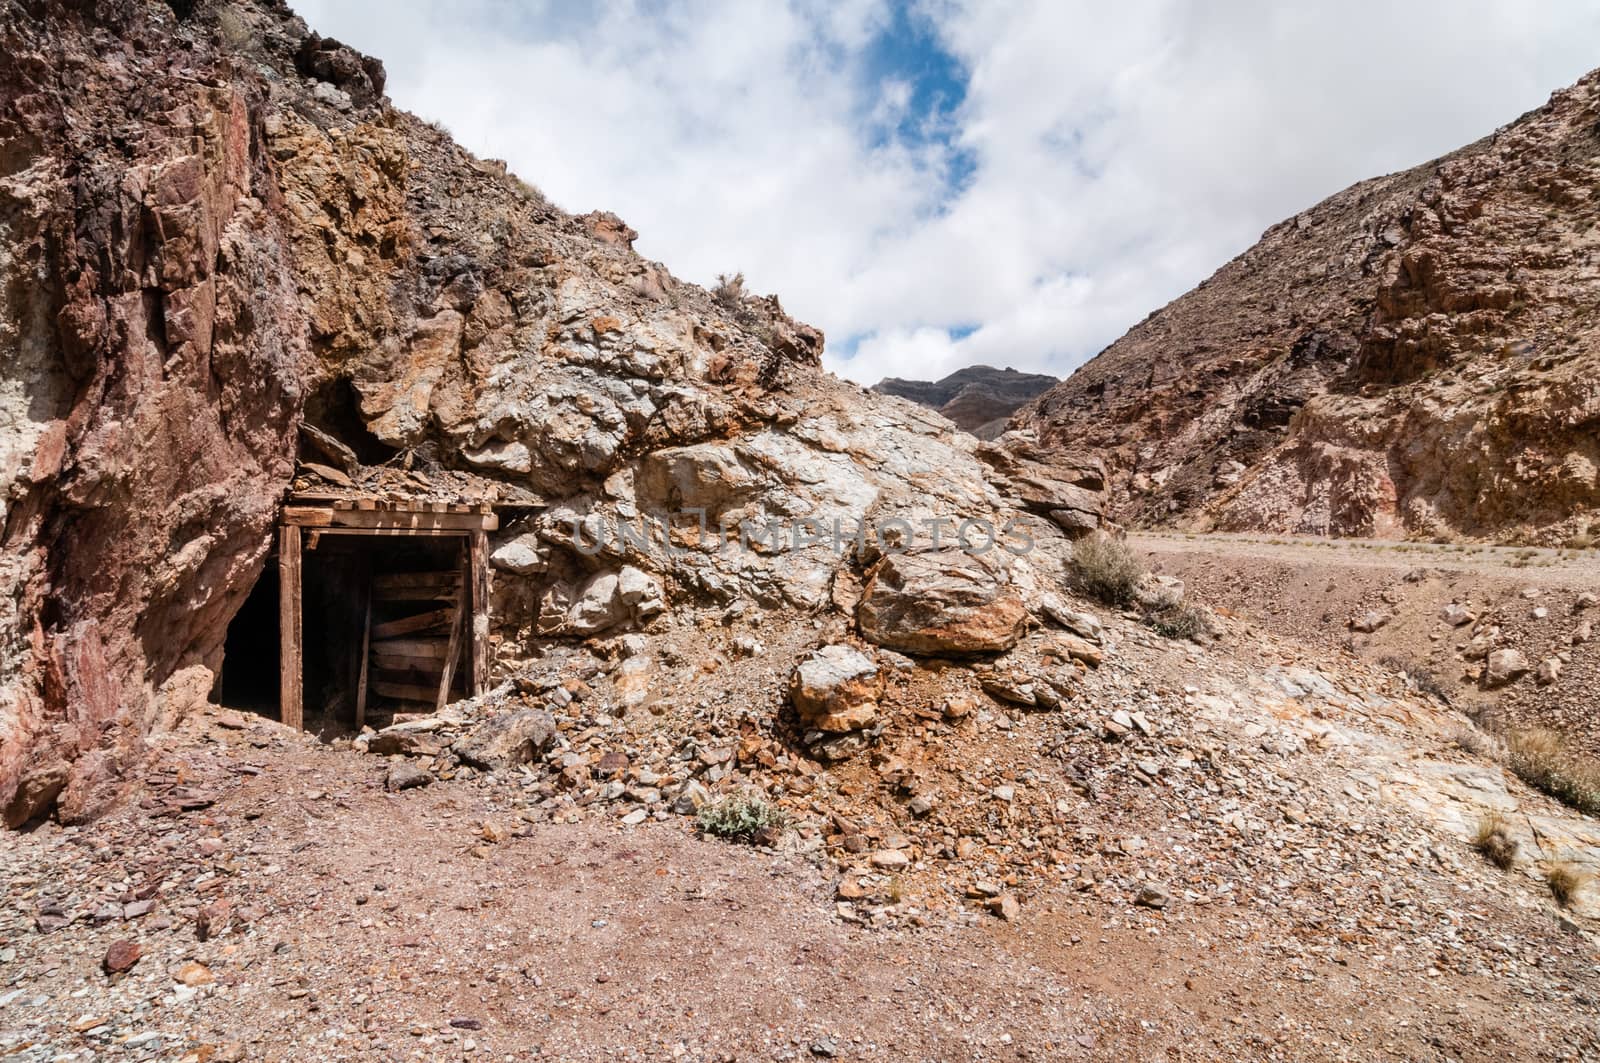 Abandoned mine entrance in Death Valley, California by Njean